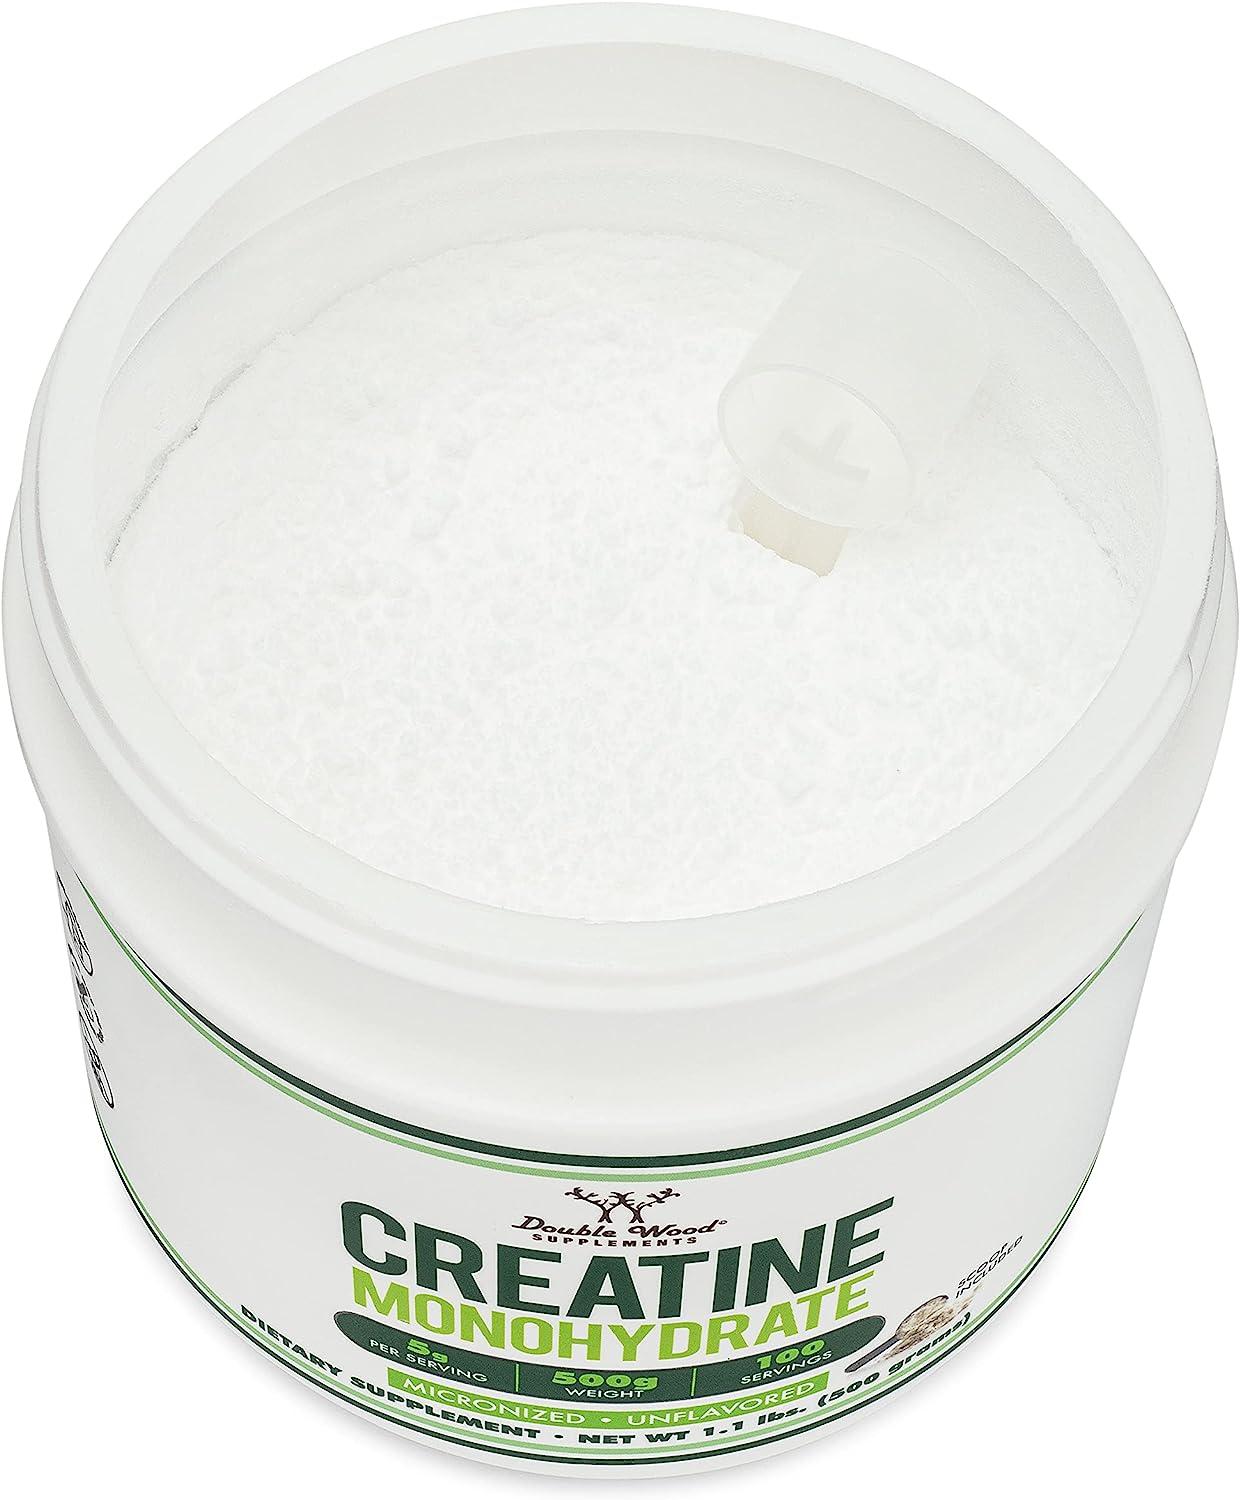 Creatine Monohydrate Powder 1.1lbs (100 Servings of 5 Grams Each - Third  Party Tested Micronized Creatine Powder) Unflavored, Keto, Vegan Friendly  (with Scoop)(Creatina Monohidratada) by Double Wood